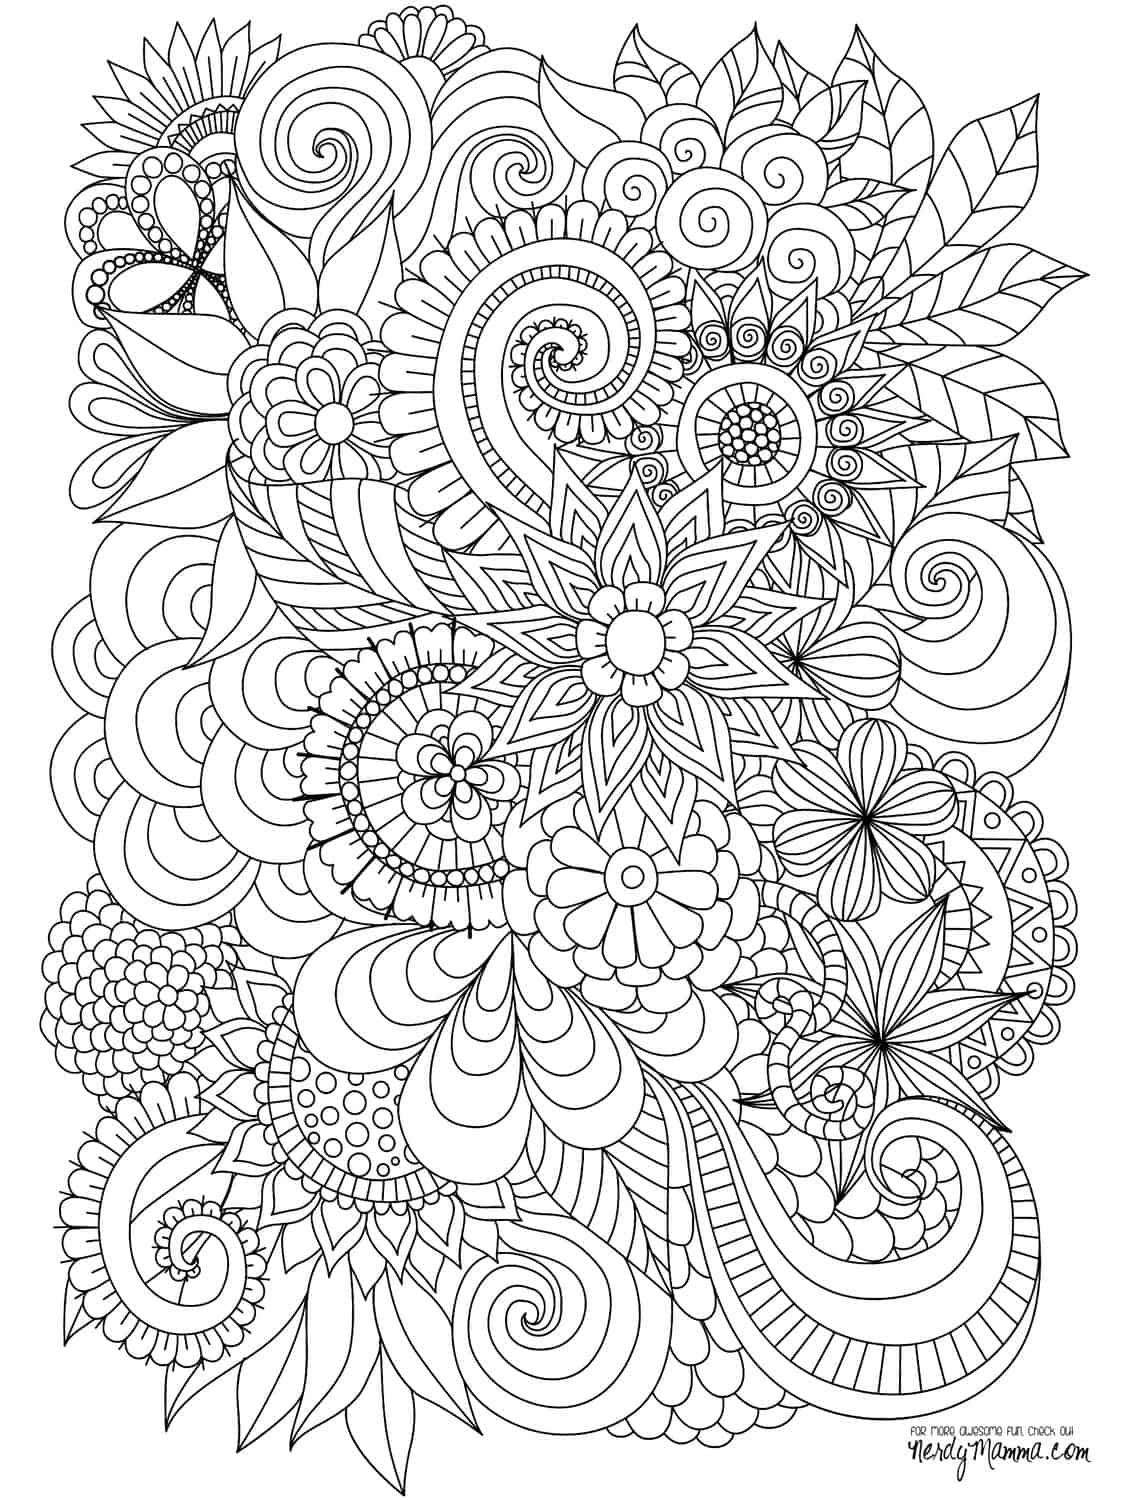 1000+ images about More coloring on Pinterest  Coloring 